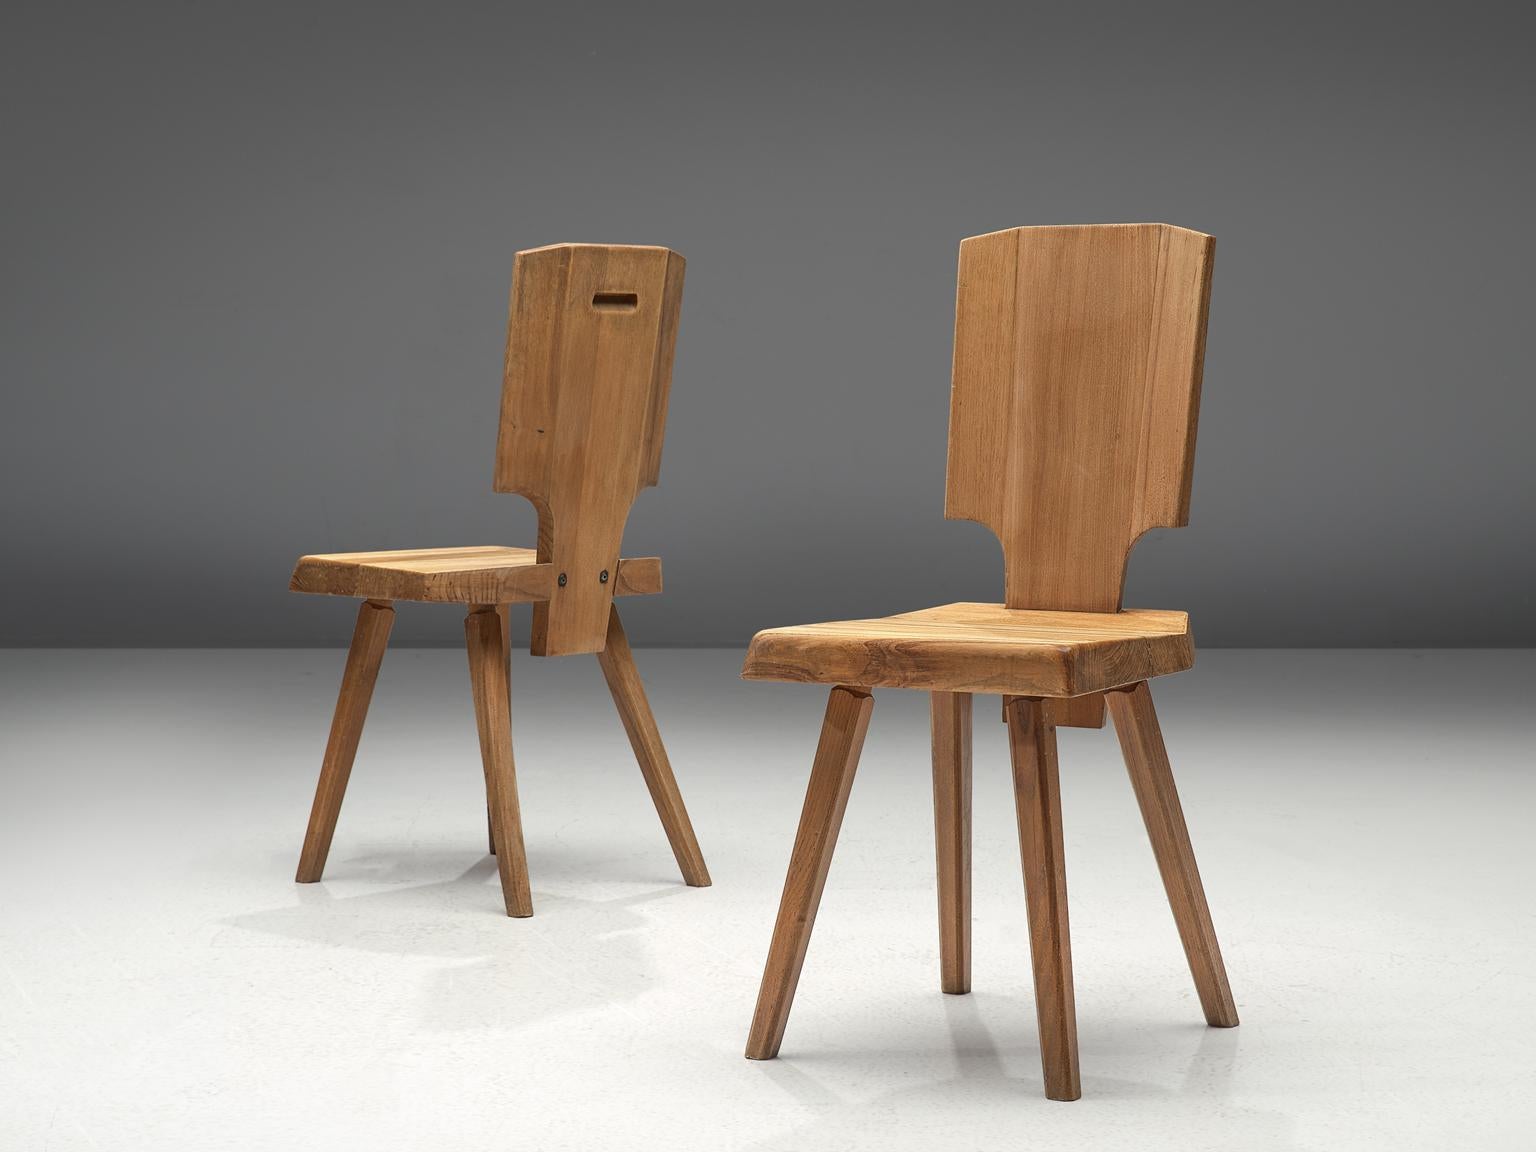 Pierre Chapo, 2 S28 dining chairs, elmwood, France, design 1972, manufactured 1972-1974.

During his travels to Alsace, Chapo discovered the Alsatian architecture and got inspired to modernize the 